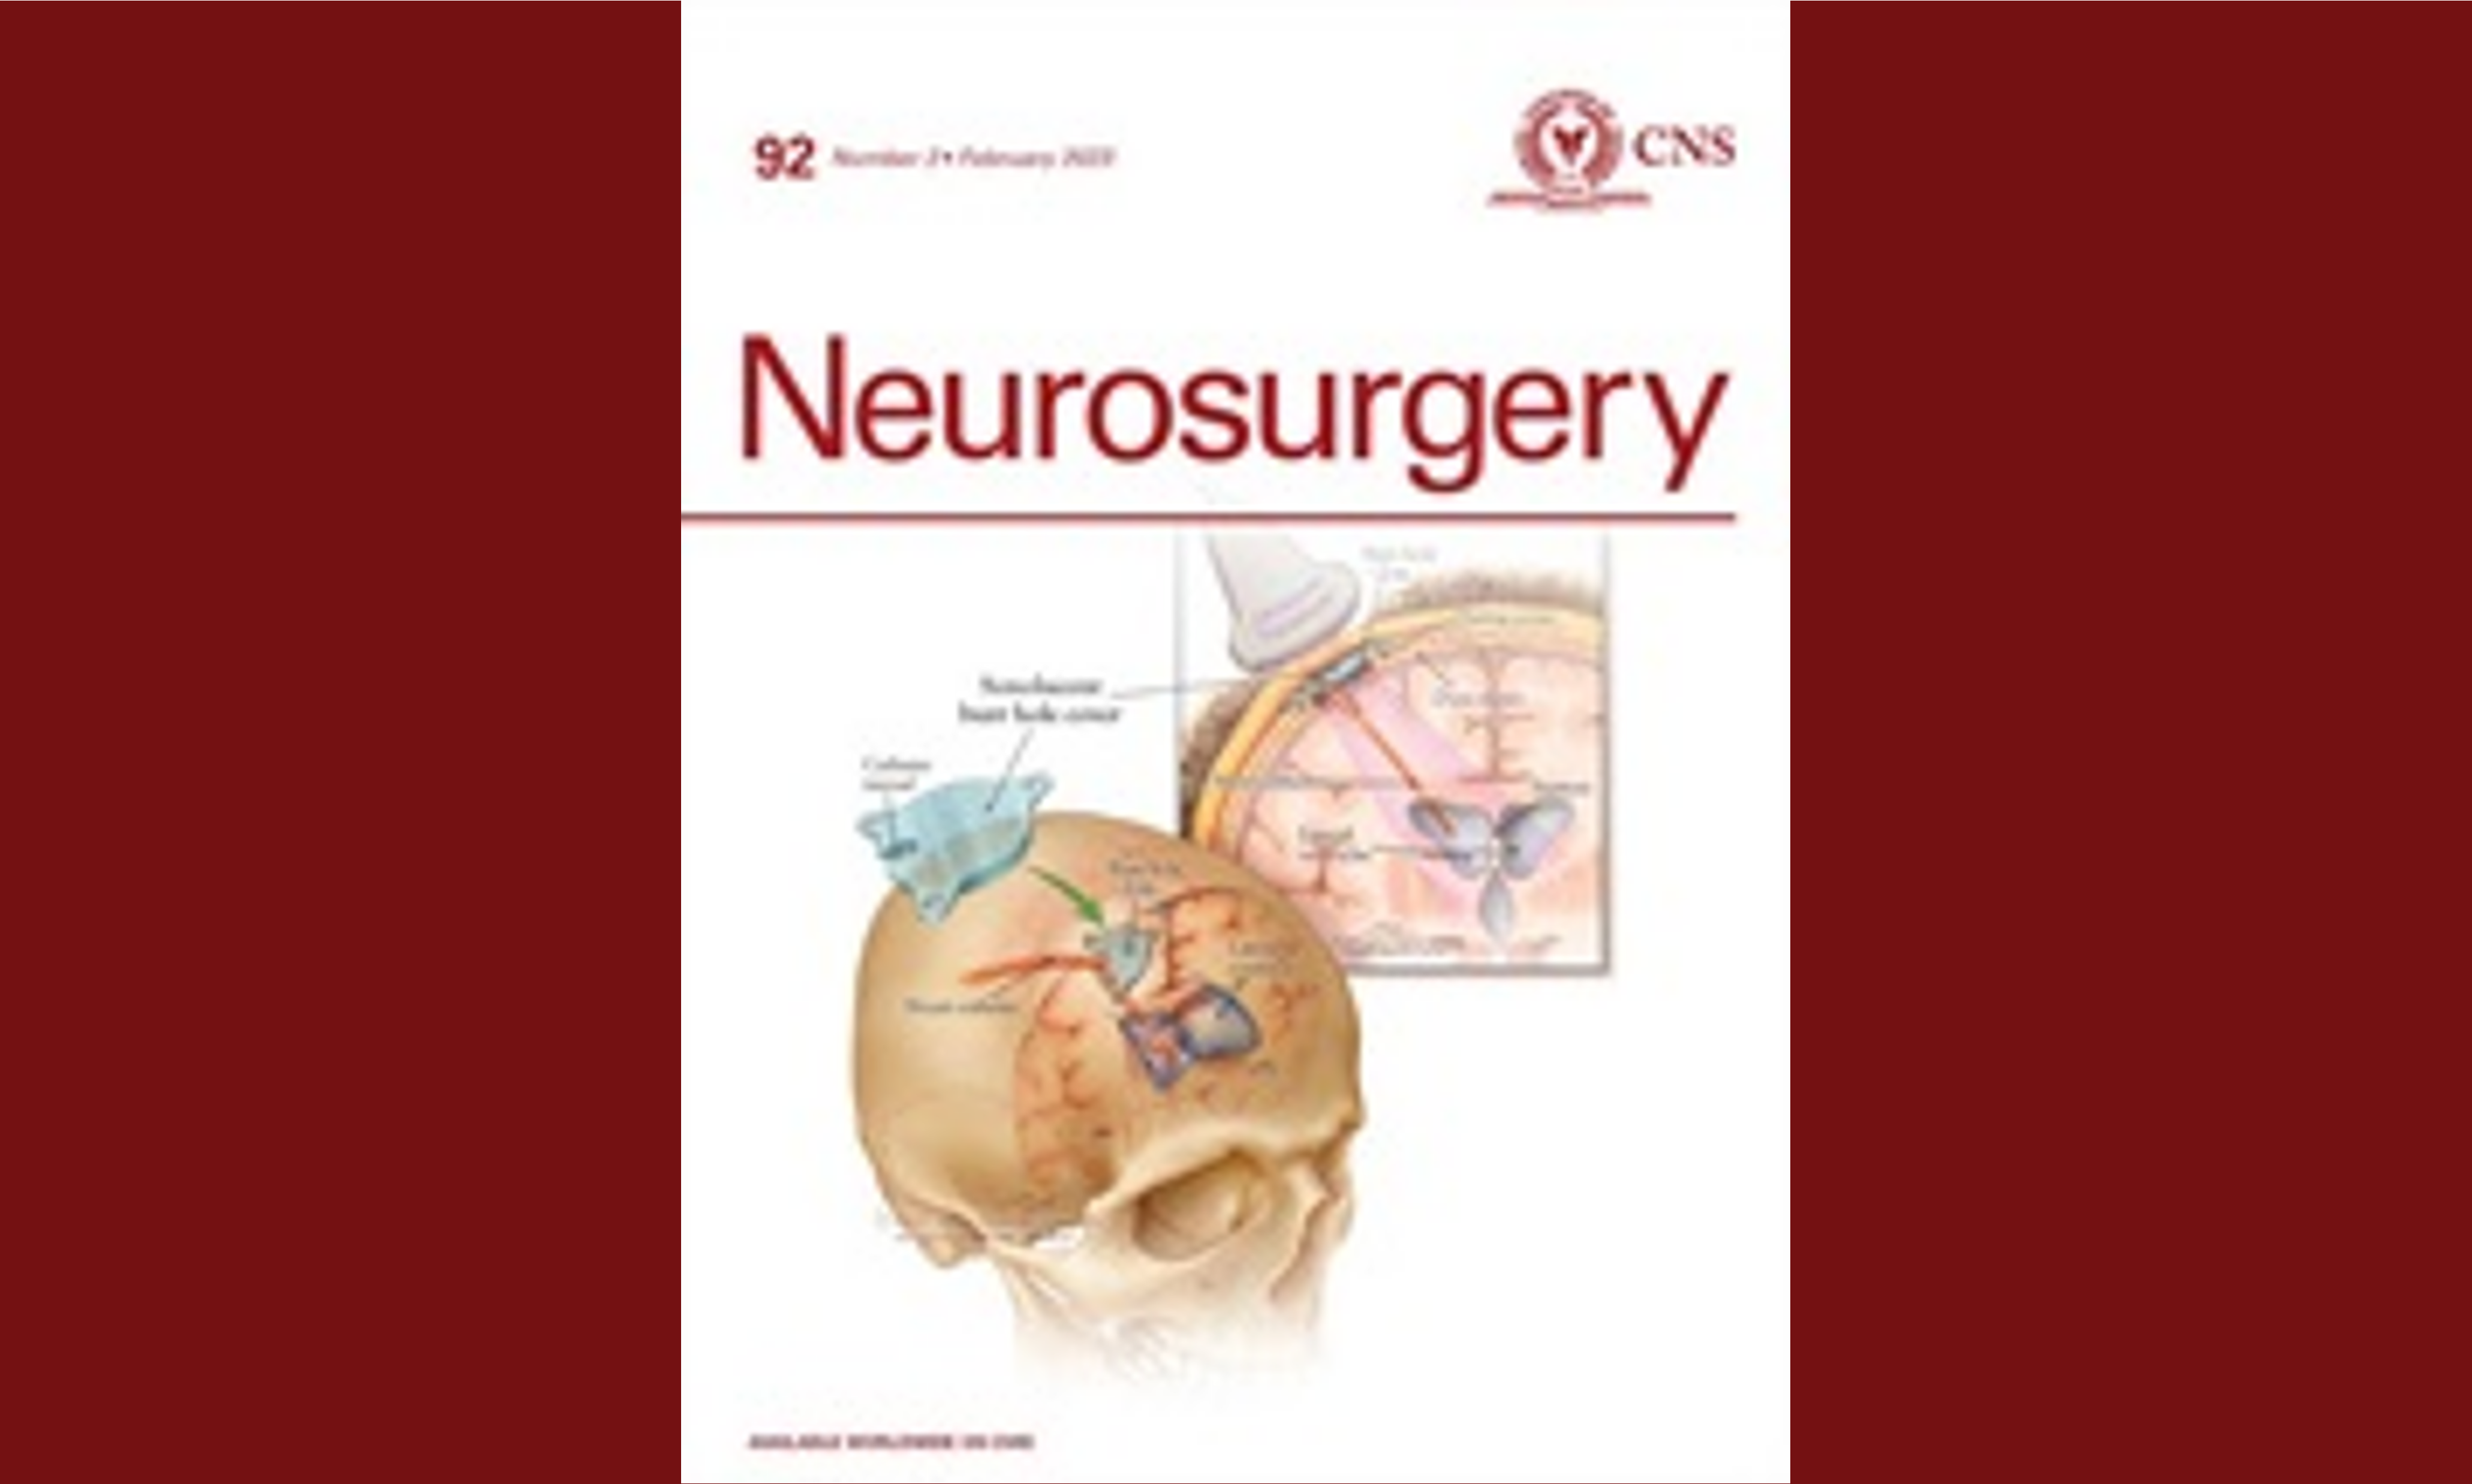 Survival, Dependency, and Health-Related Quality of Life in Patients With Ruptured Intracranial Aneurysm: 10-Year Follow-up of the United Kingdom Cohort of the International Subarachnoid Aneurysm Trial